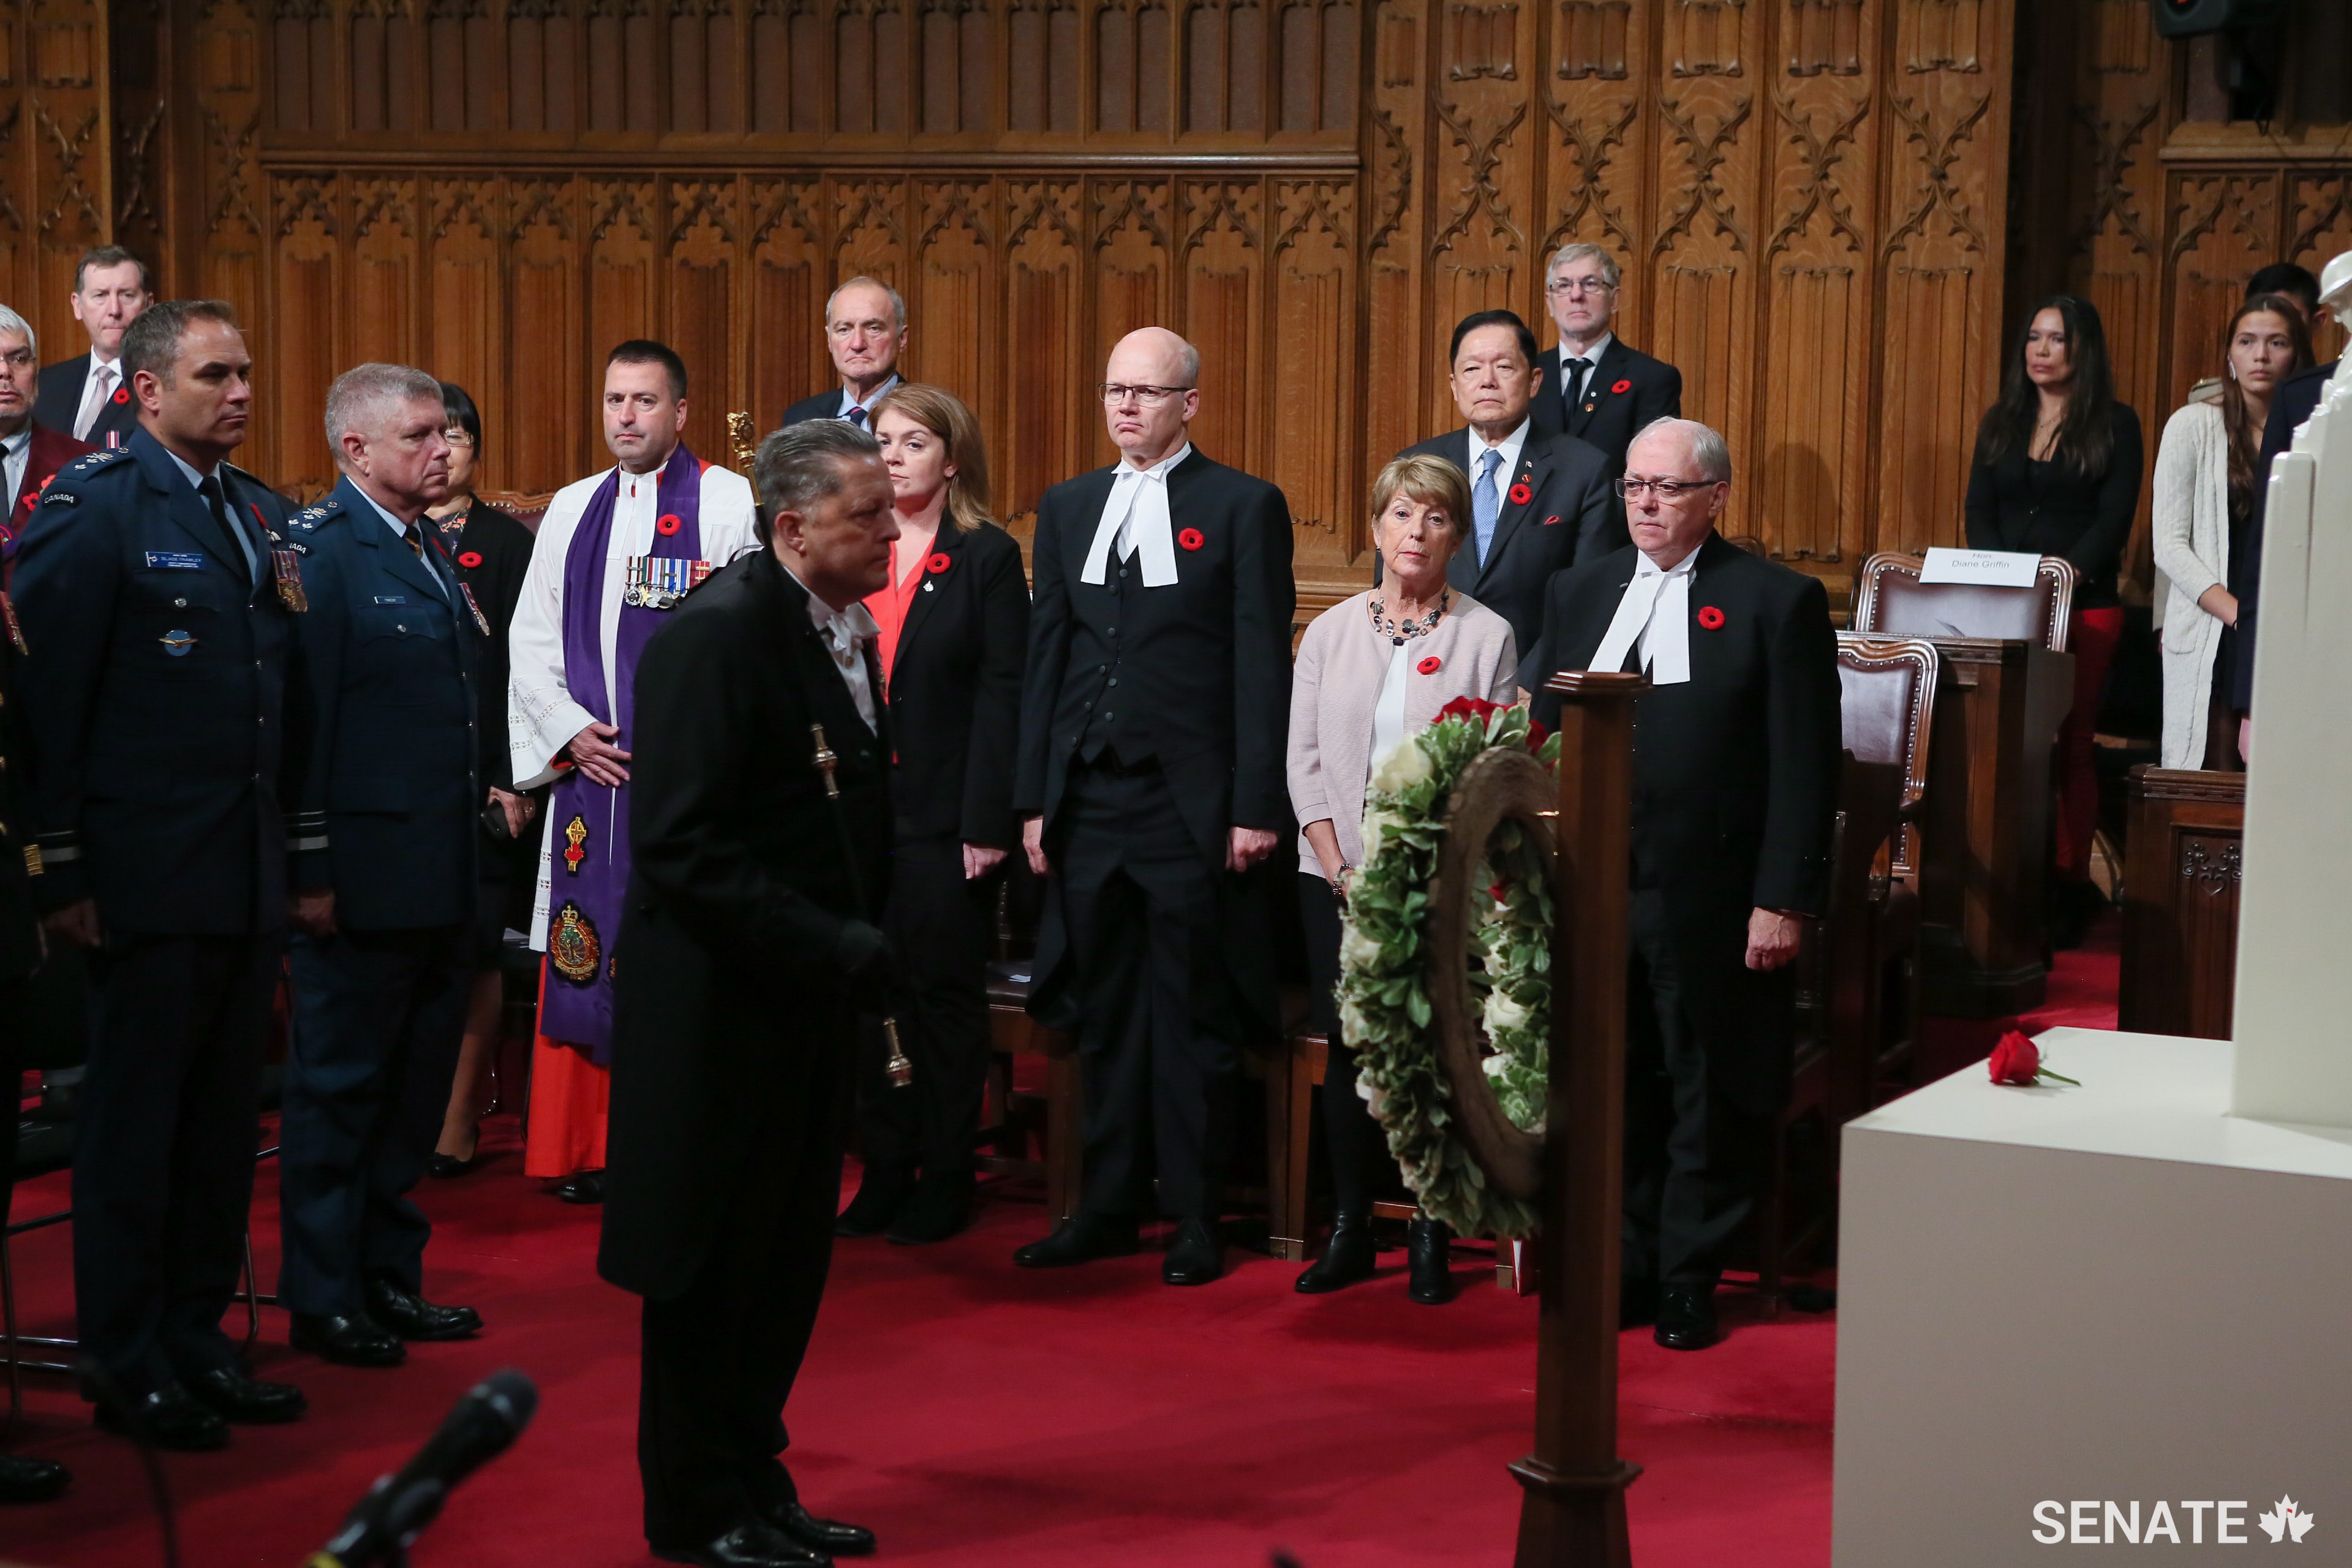 After a moment of silence, Usher of the Black Rod J. Greg Peters prepares to lead the procession out of the Chamber.